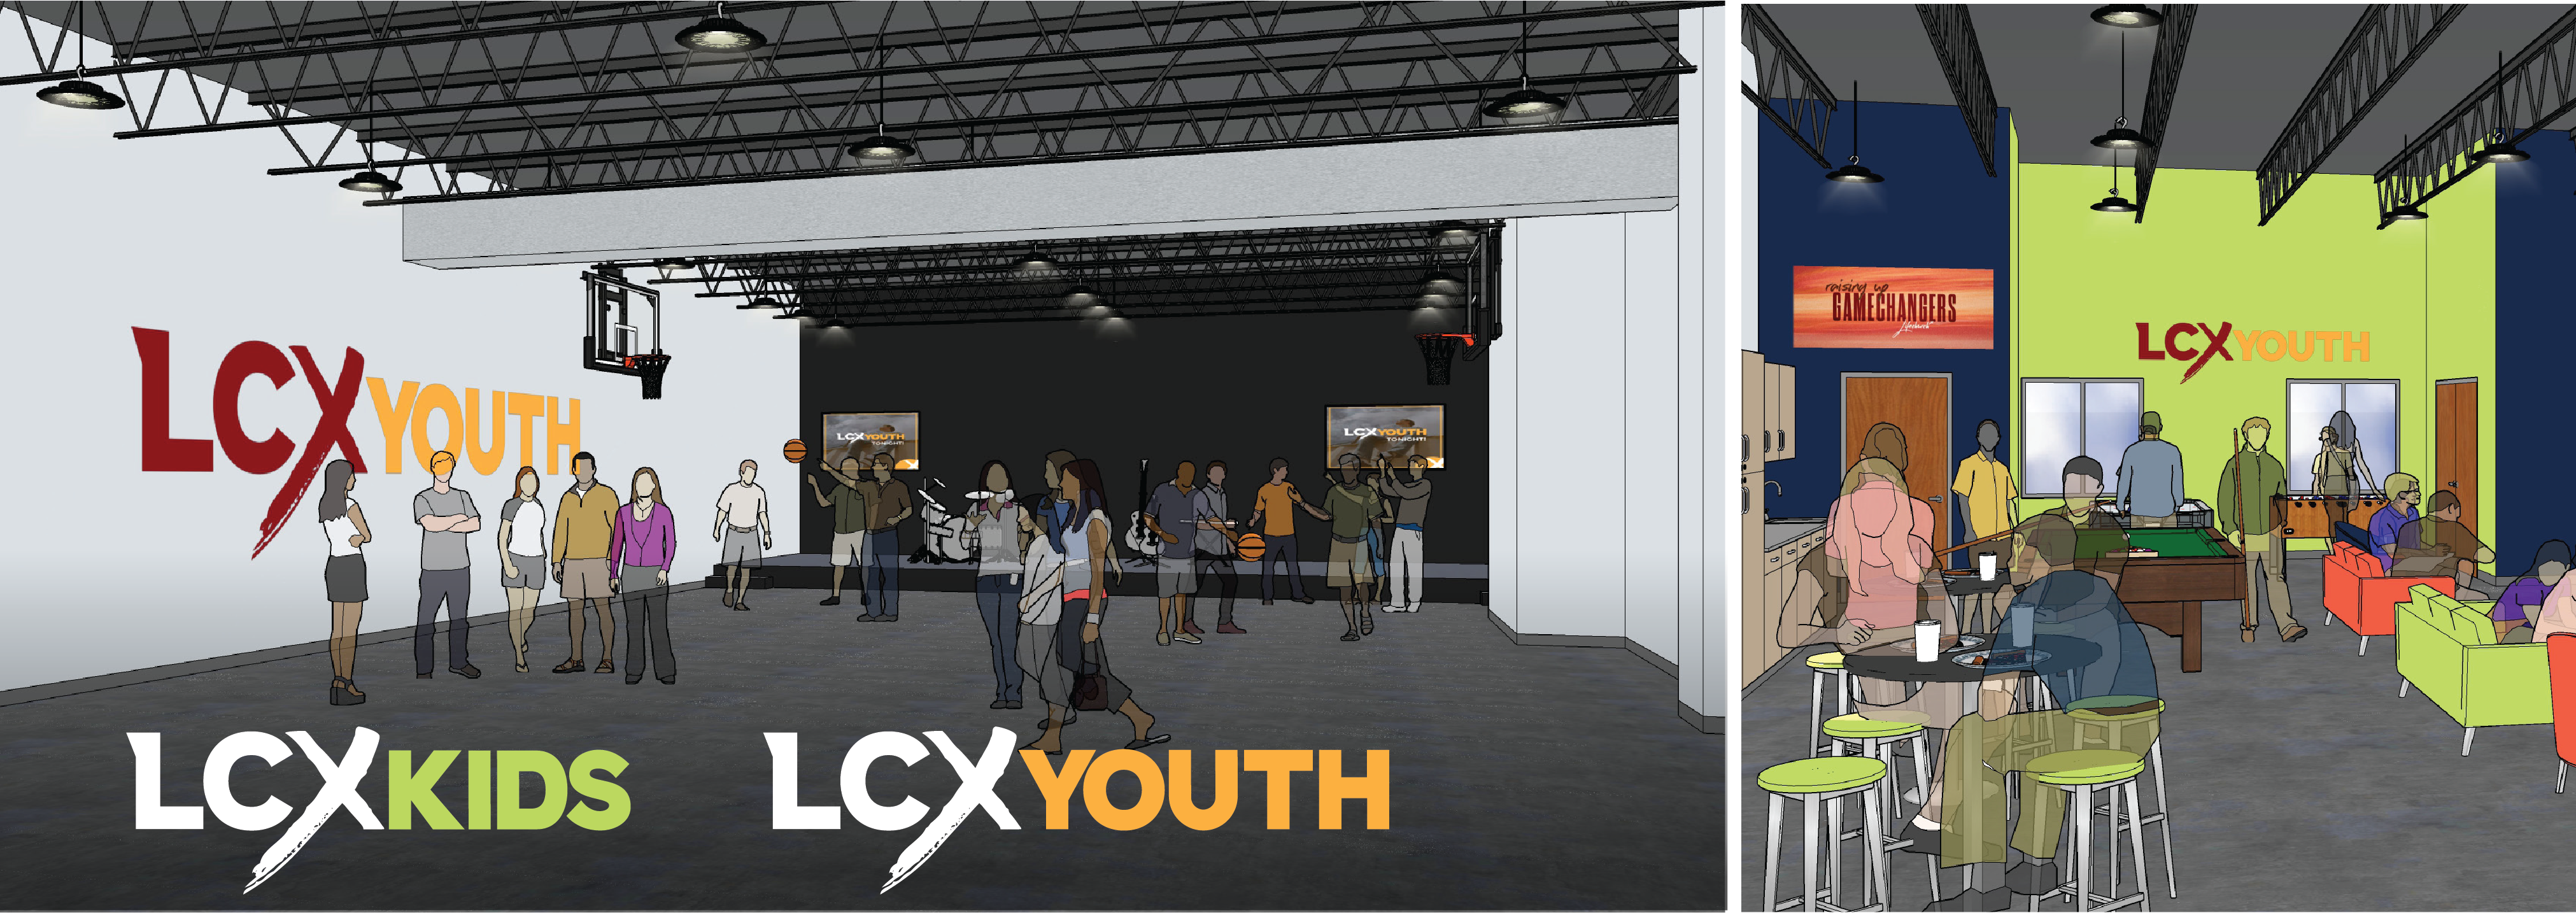 LifechurchX Vision Campaign LCXKids and LCXYouth renderings